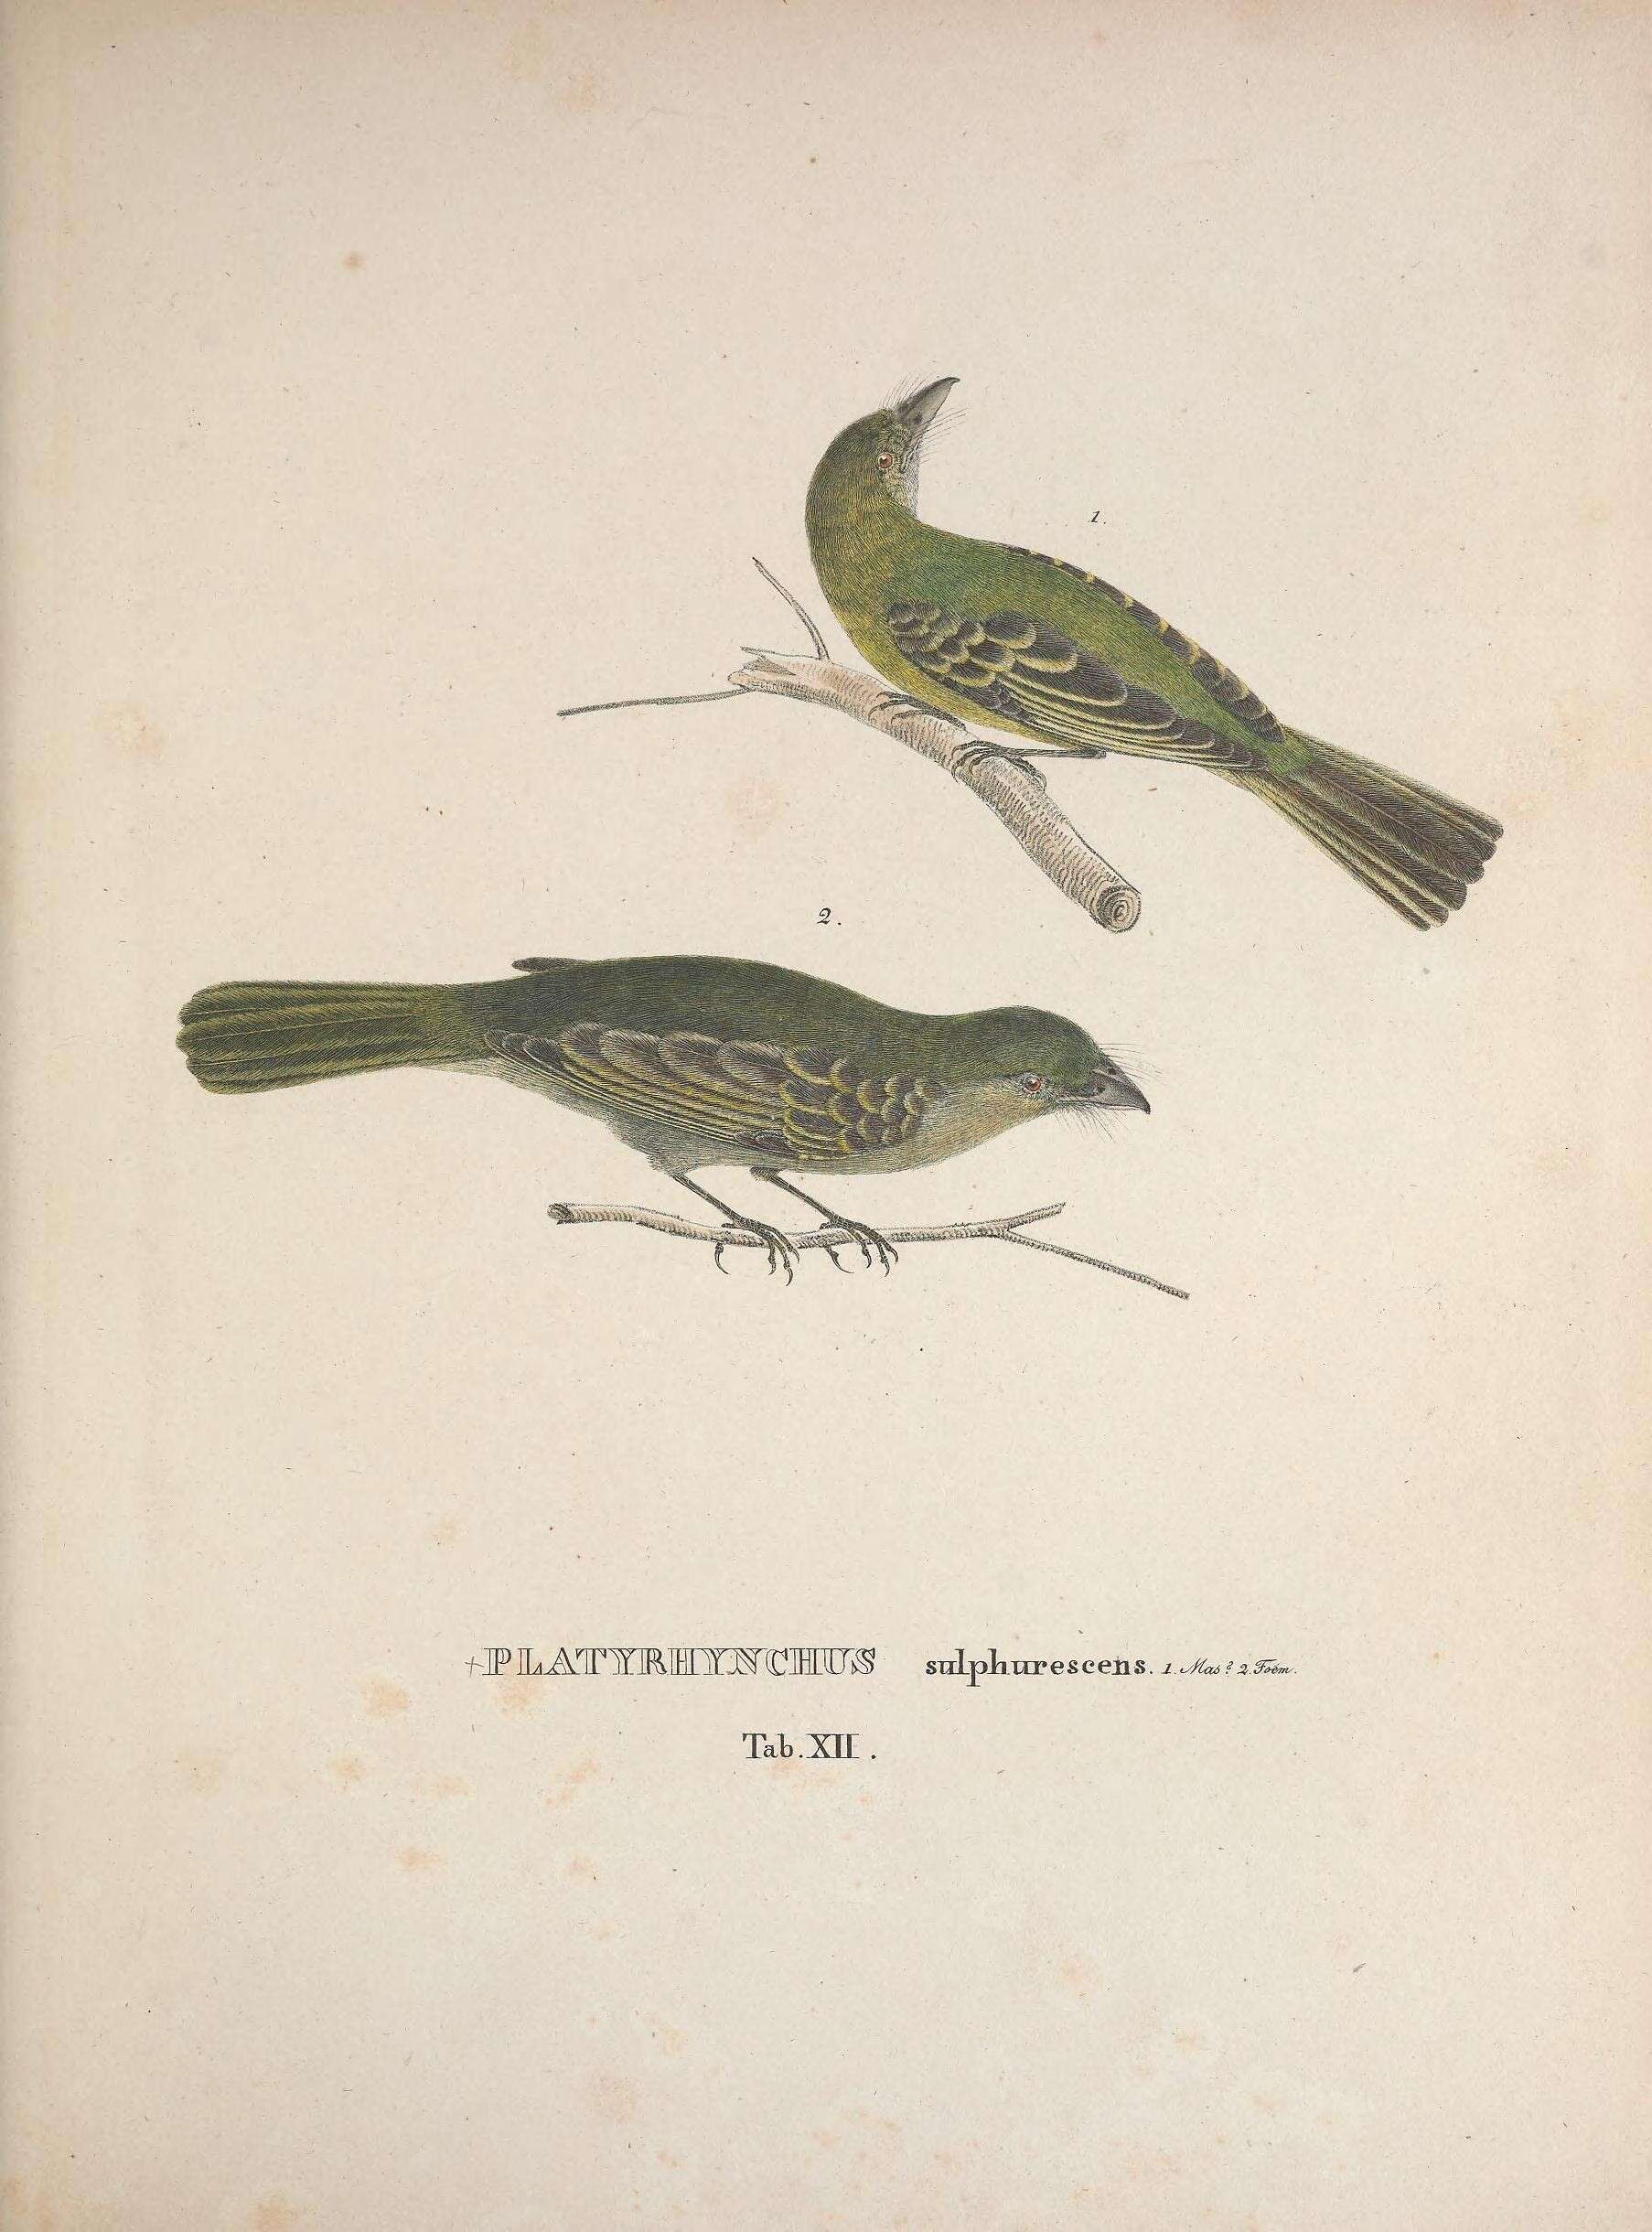 Image of Yellow-olive Flatbill